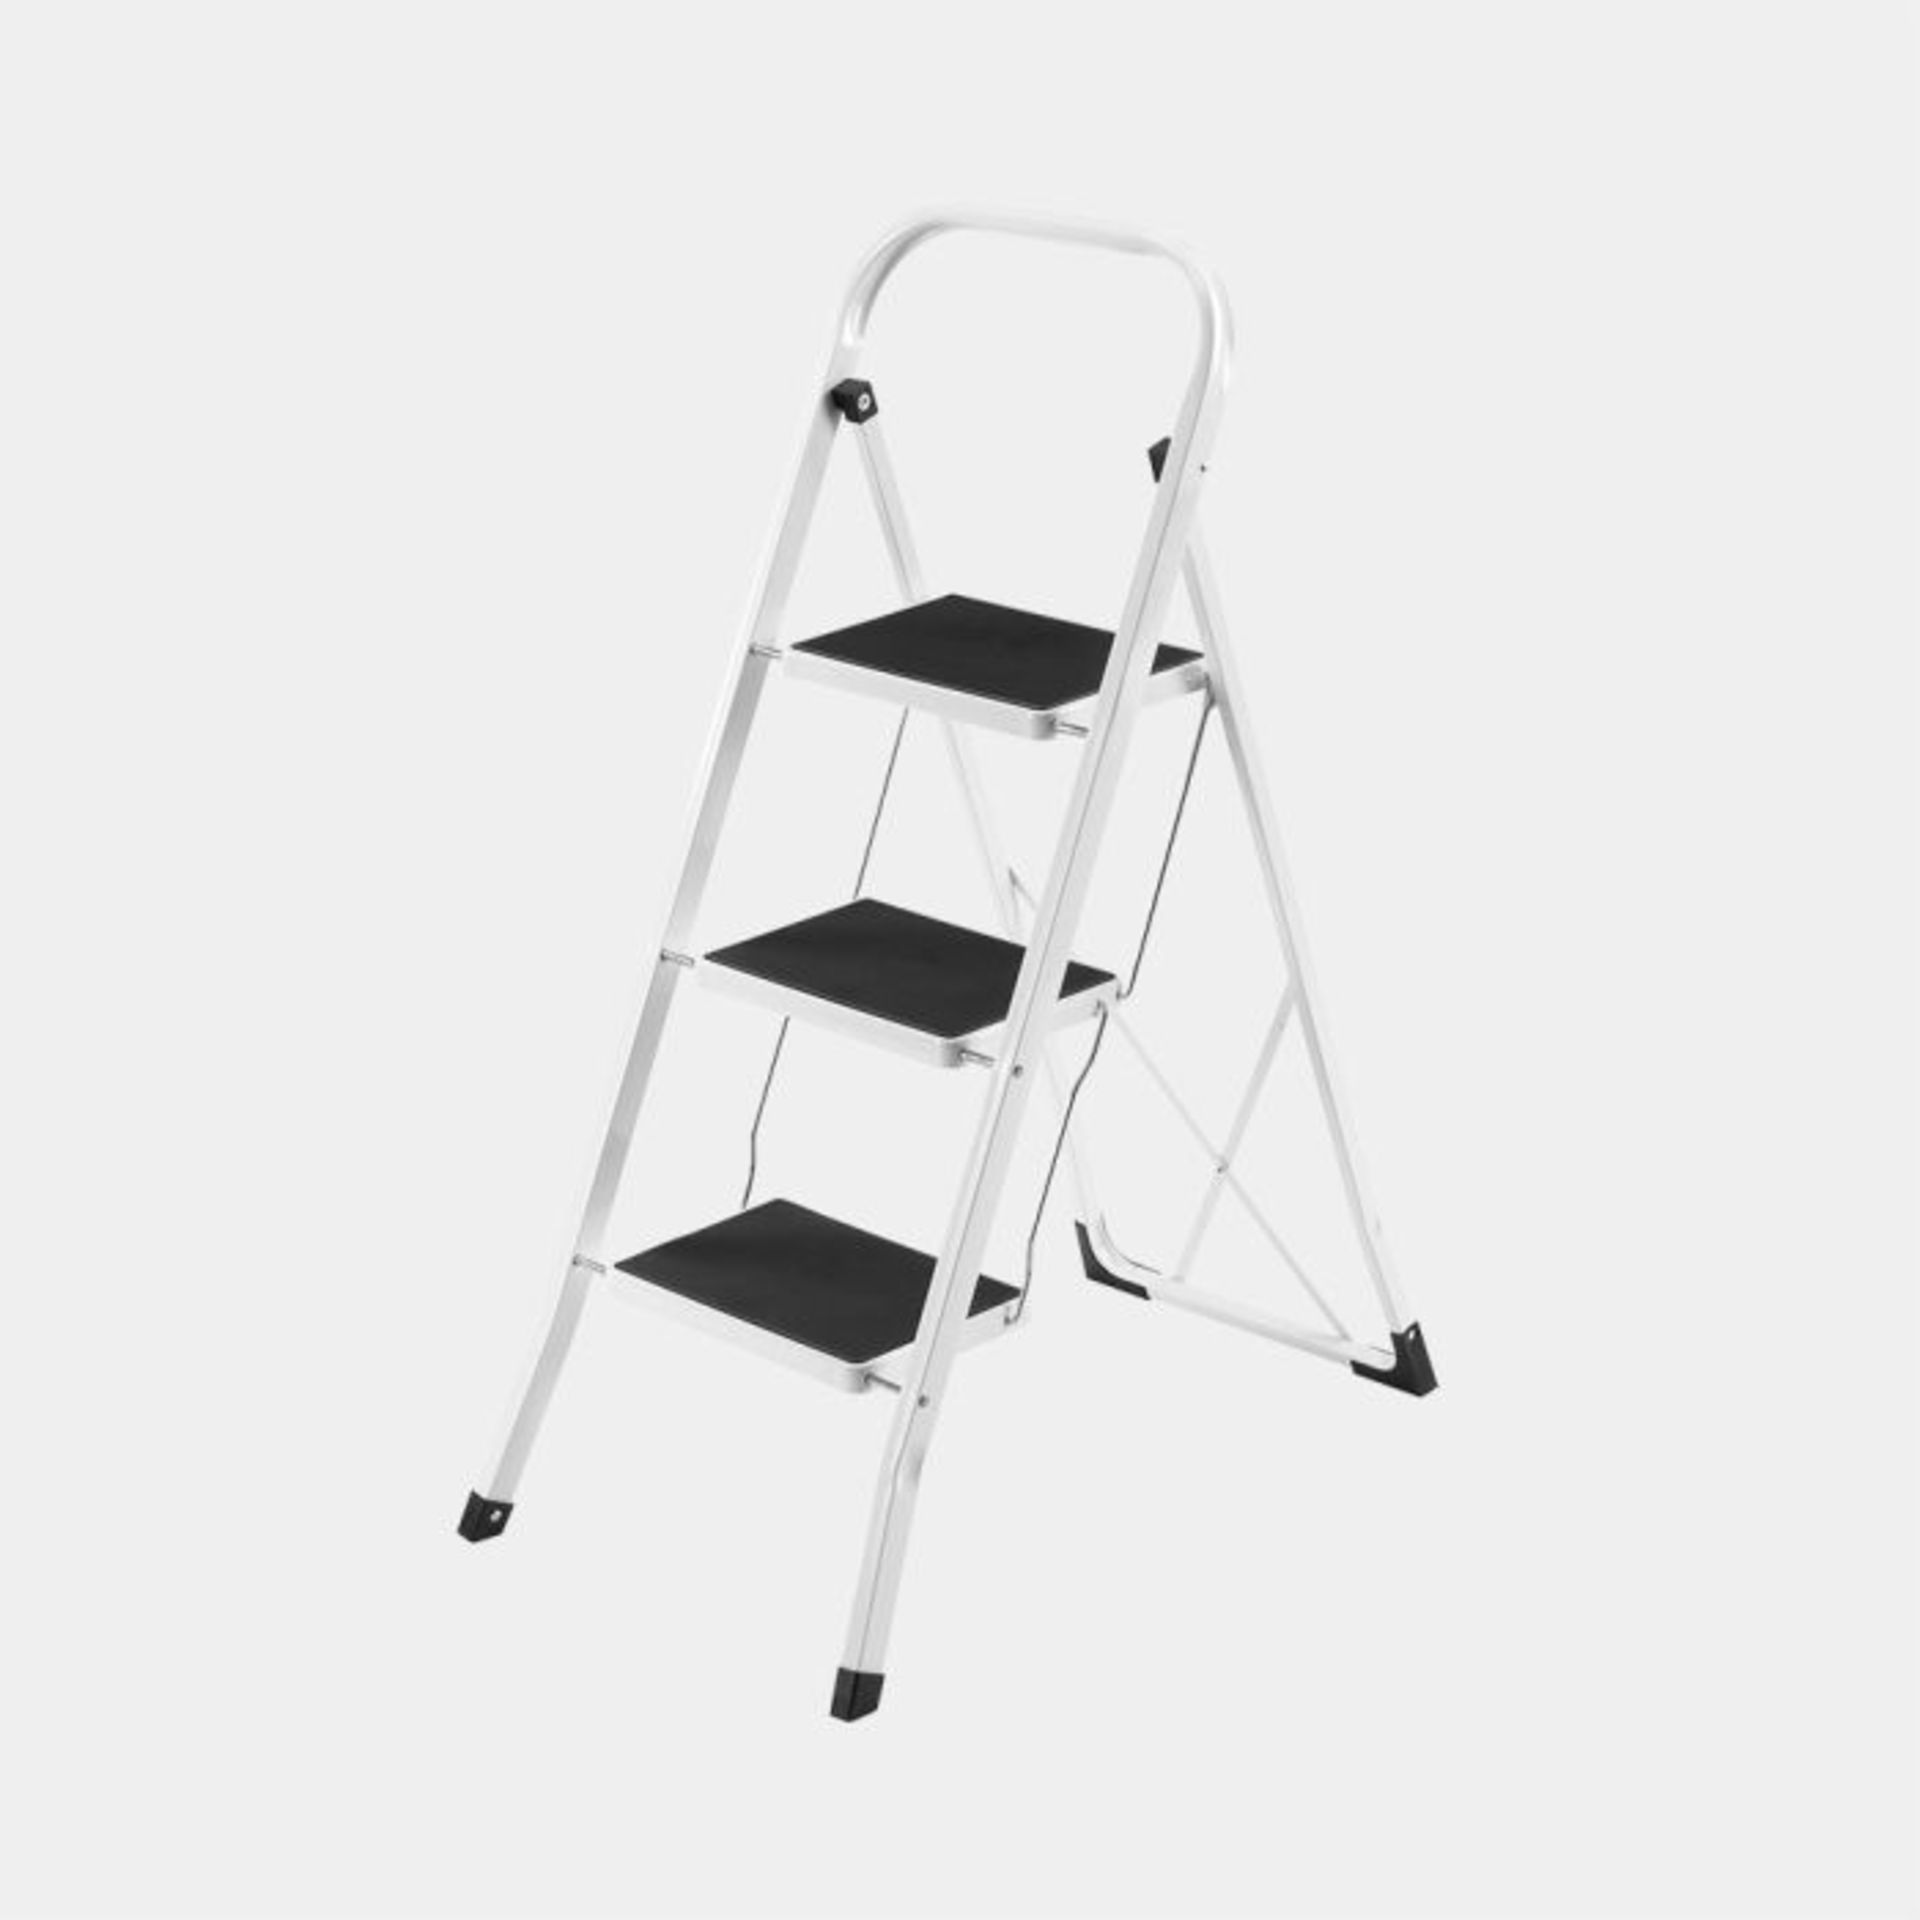 Heavy Duty 3 Step Ladder. - S2.6. Lightweight yet robust steel construction with white powder coated